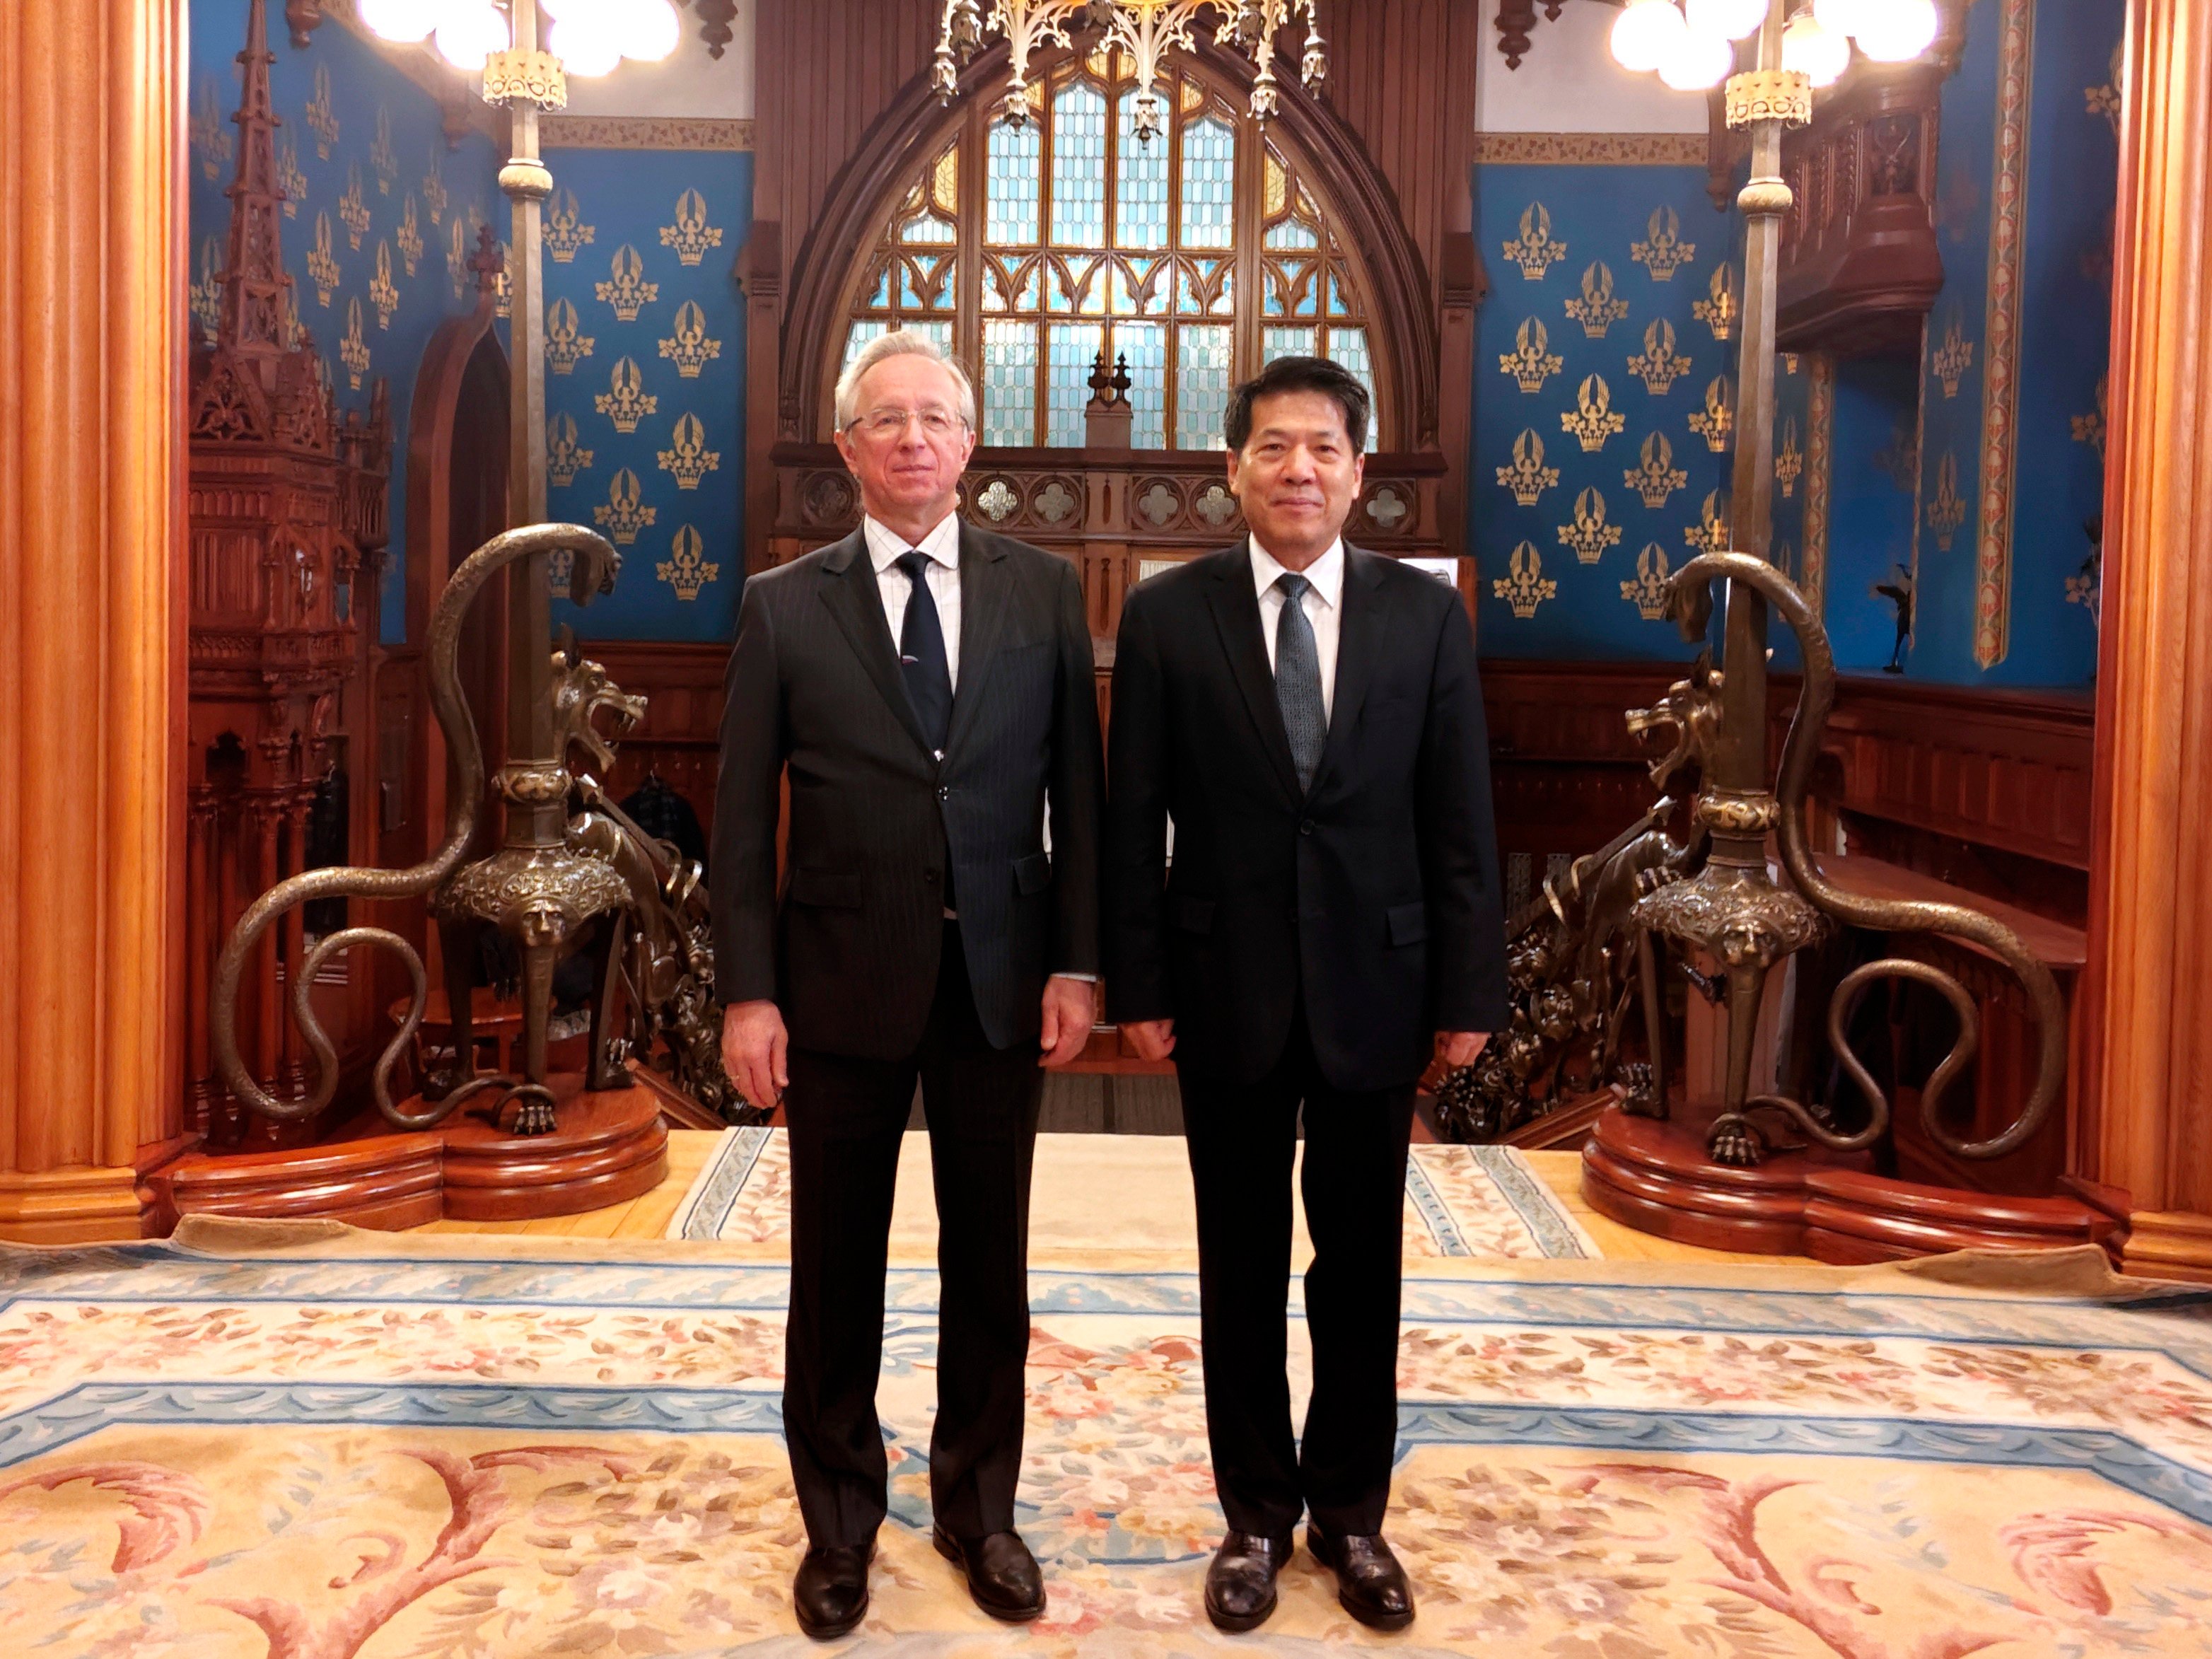 Russian Deputy Foreign Minister Mikhail Galuzin (left) poses with Li Hui, China’s special representative on Eurasian Affairs, in Moscow on March 2. China’s point man on Ukraine went on a tour to Russia and Europe to “mediate and build consensus” on how to end the war. Photo: Xinhua